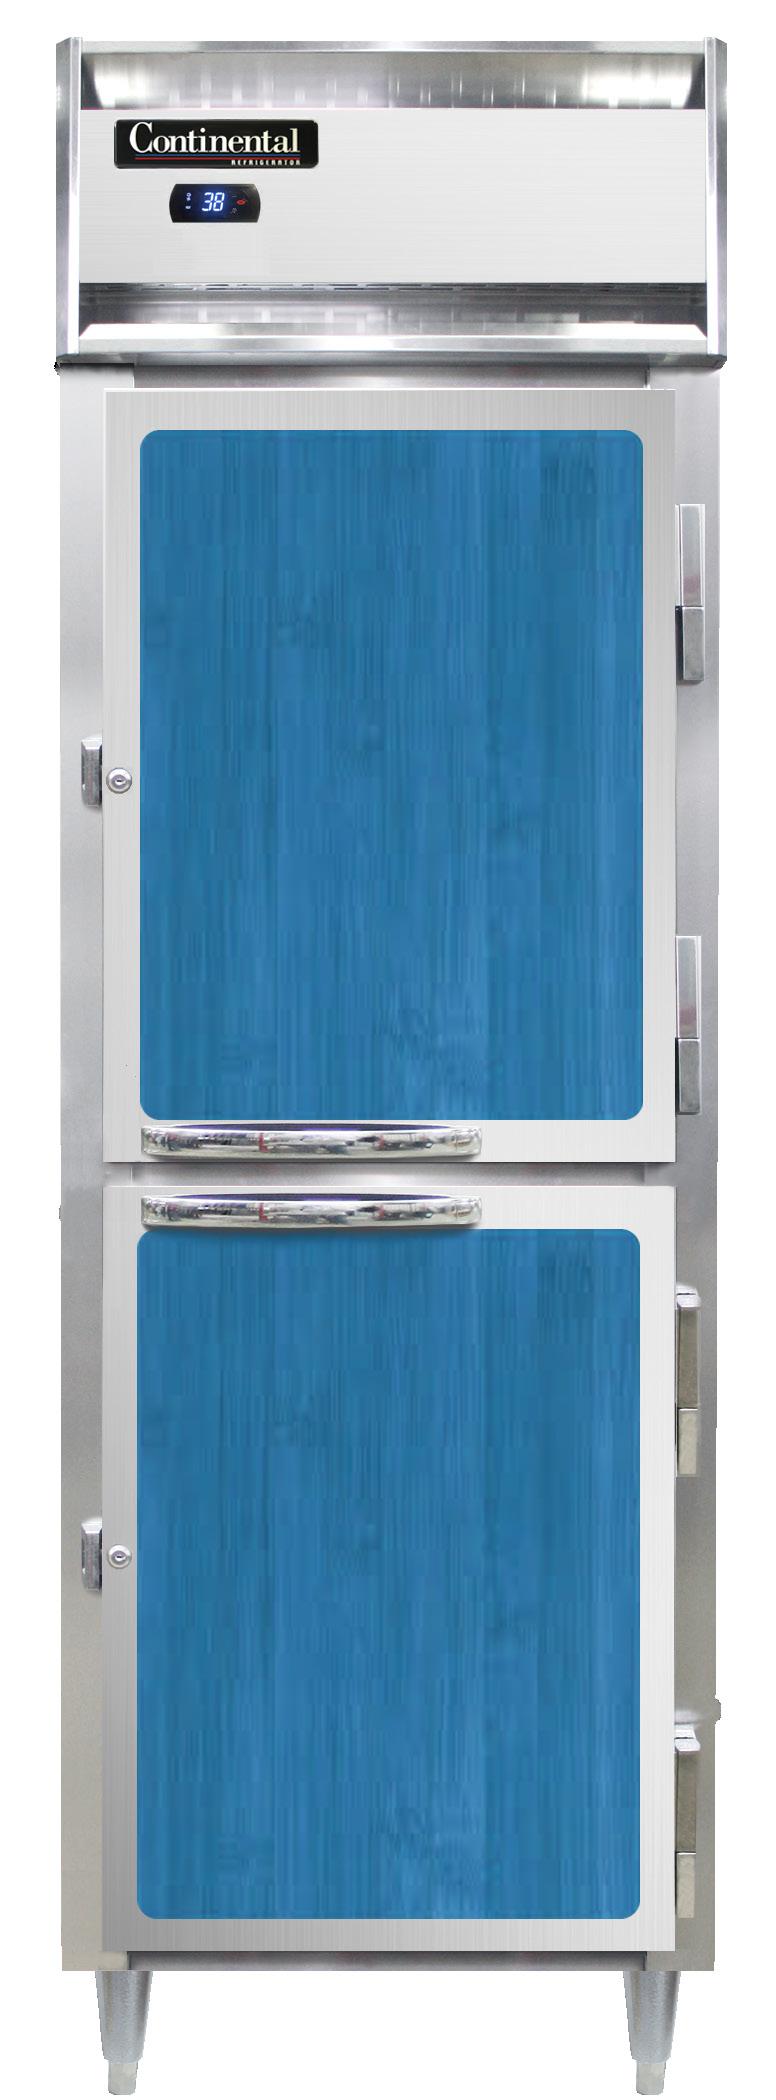 DL1RSNSSGD & DL1RINSS Factory-encased laminated door fronts Aesthetics to match kitchen design, easy to clean Standard Feature Removable stainless steel ramps and rack guides* Reinforced stainless